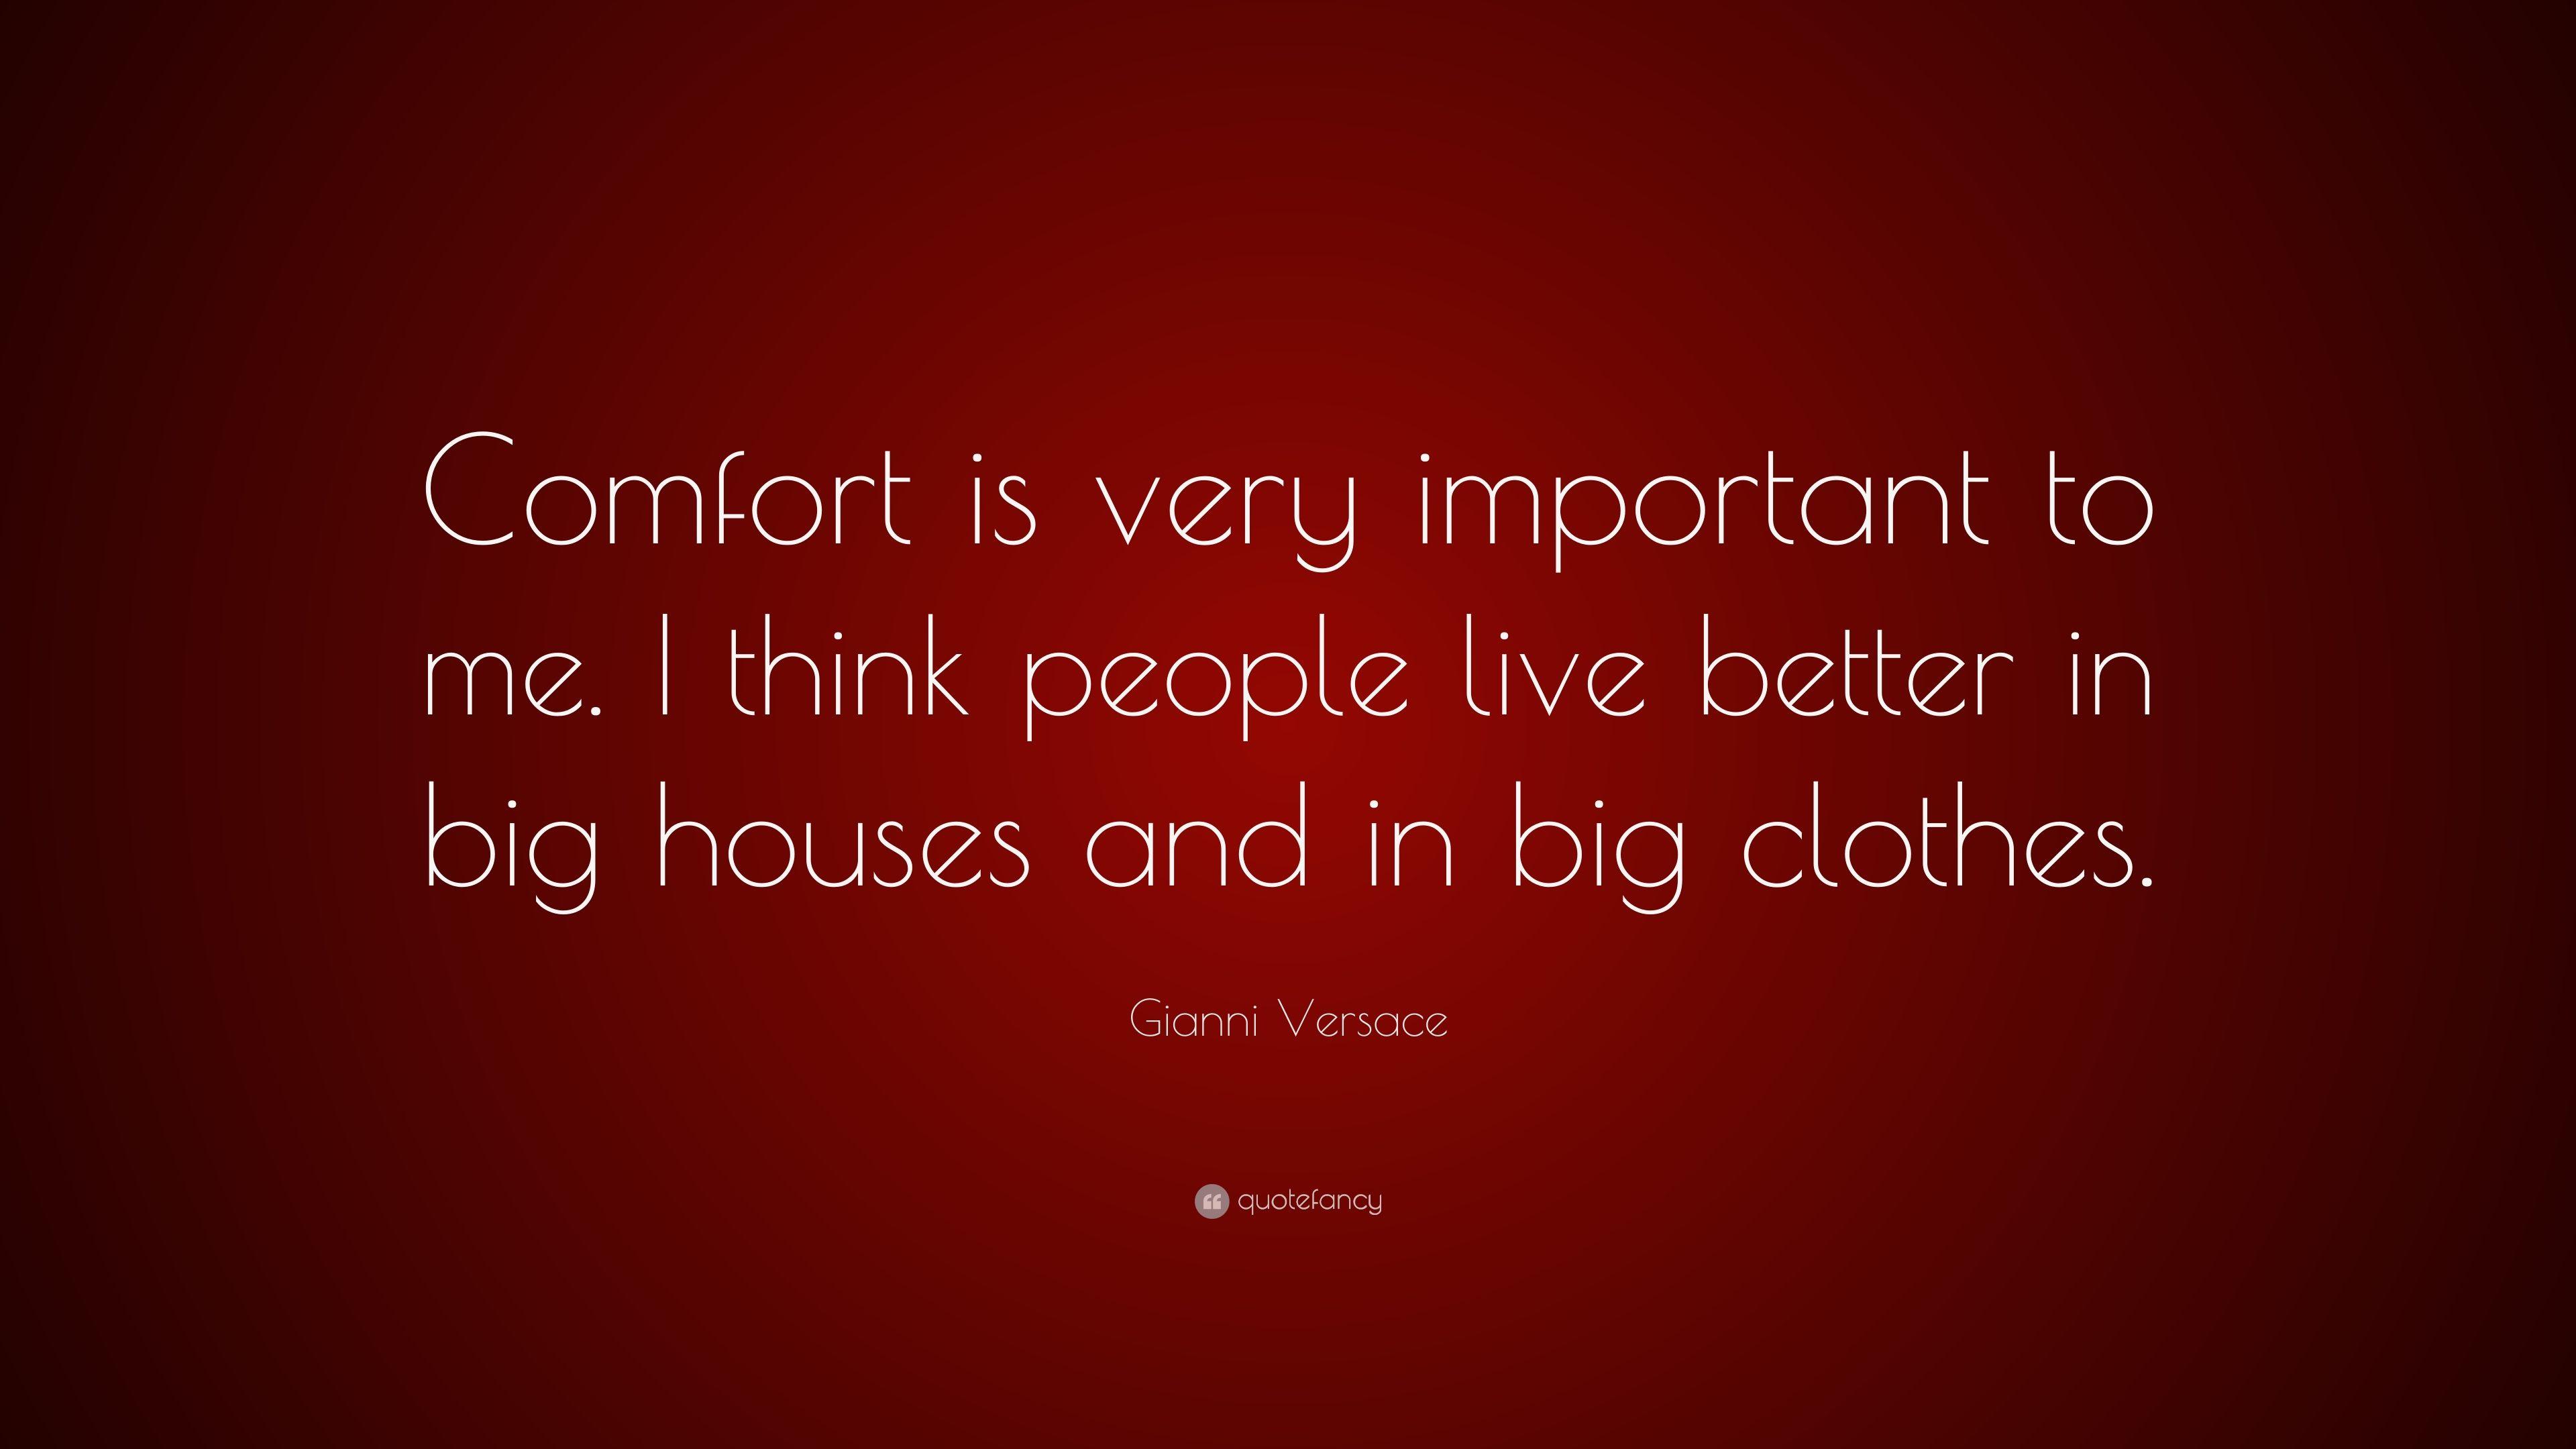 Gianni Versace Quote: “Comfort is very important to me. I think